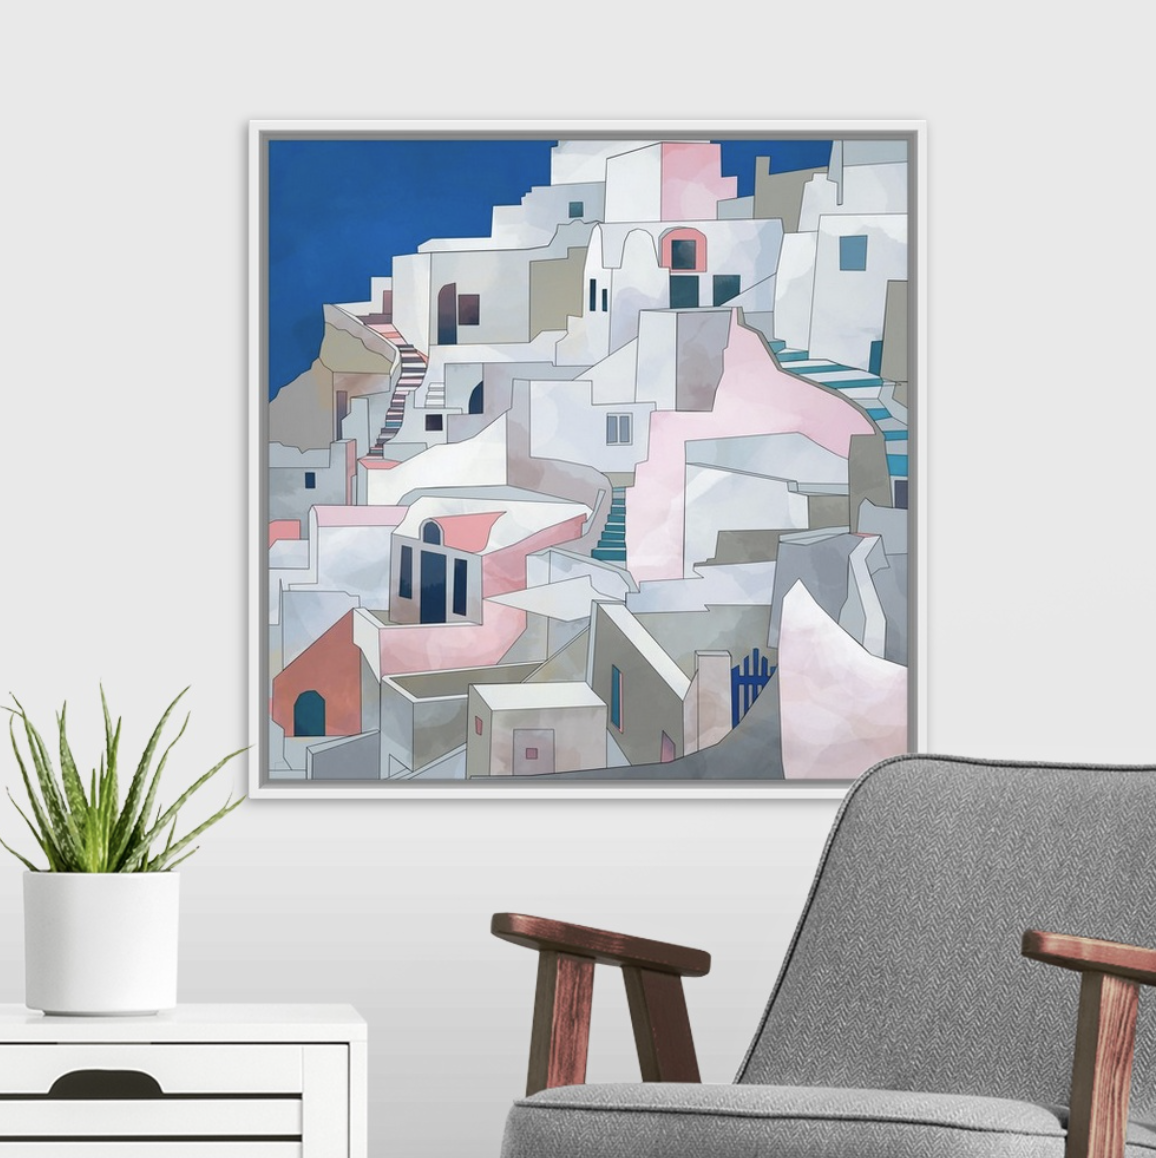 Abstract painting of geometric village scene on wall, modern furniture in foreground for home decor inspiration